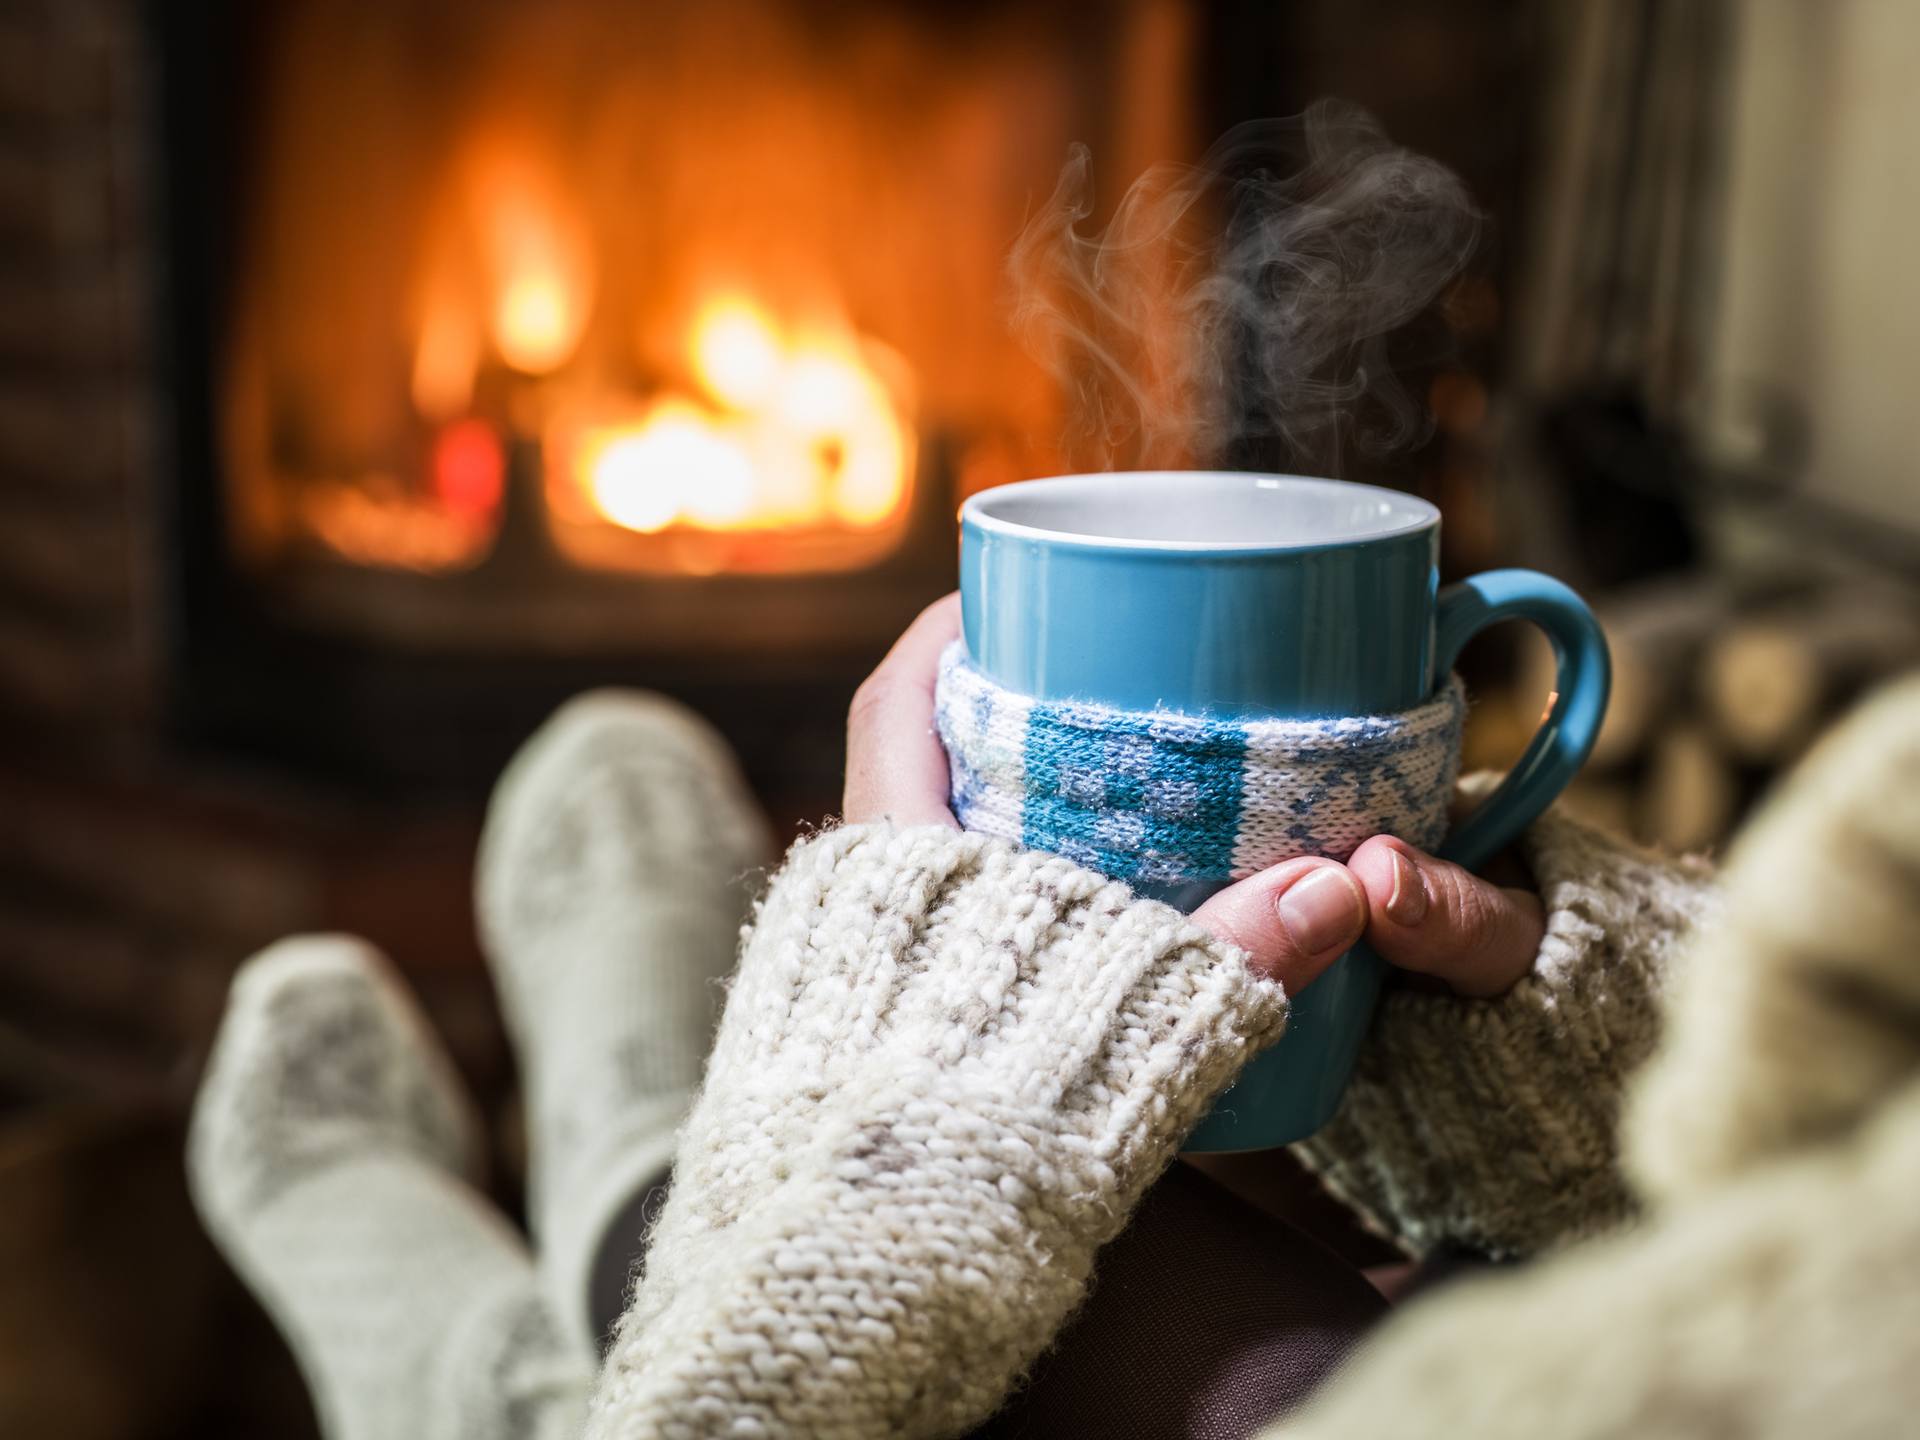 How to stay healthy this winter